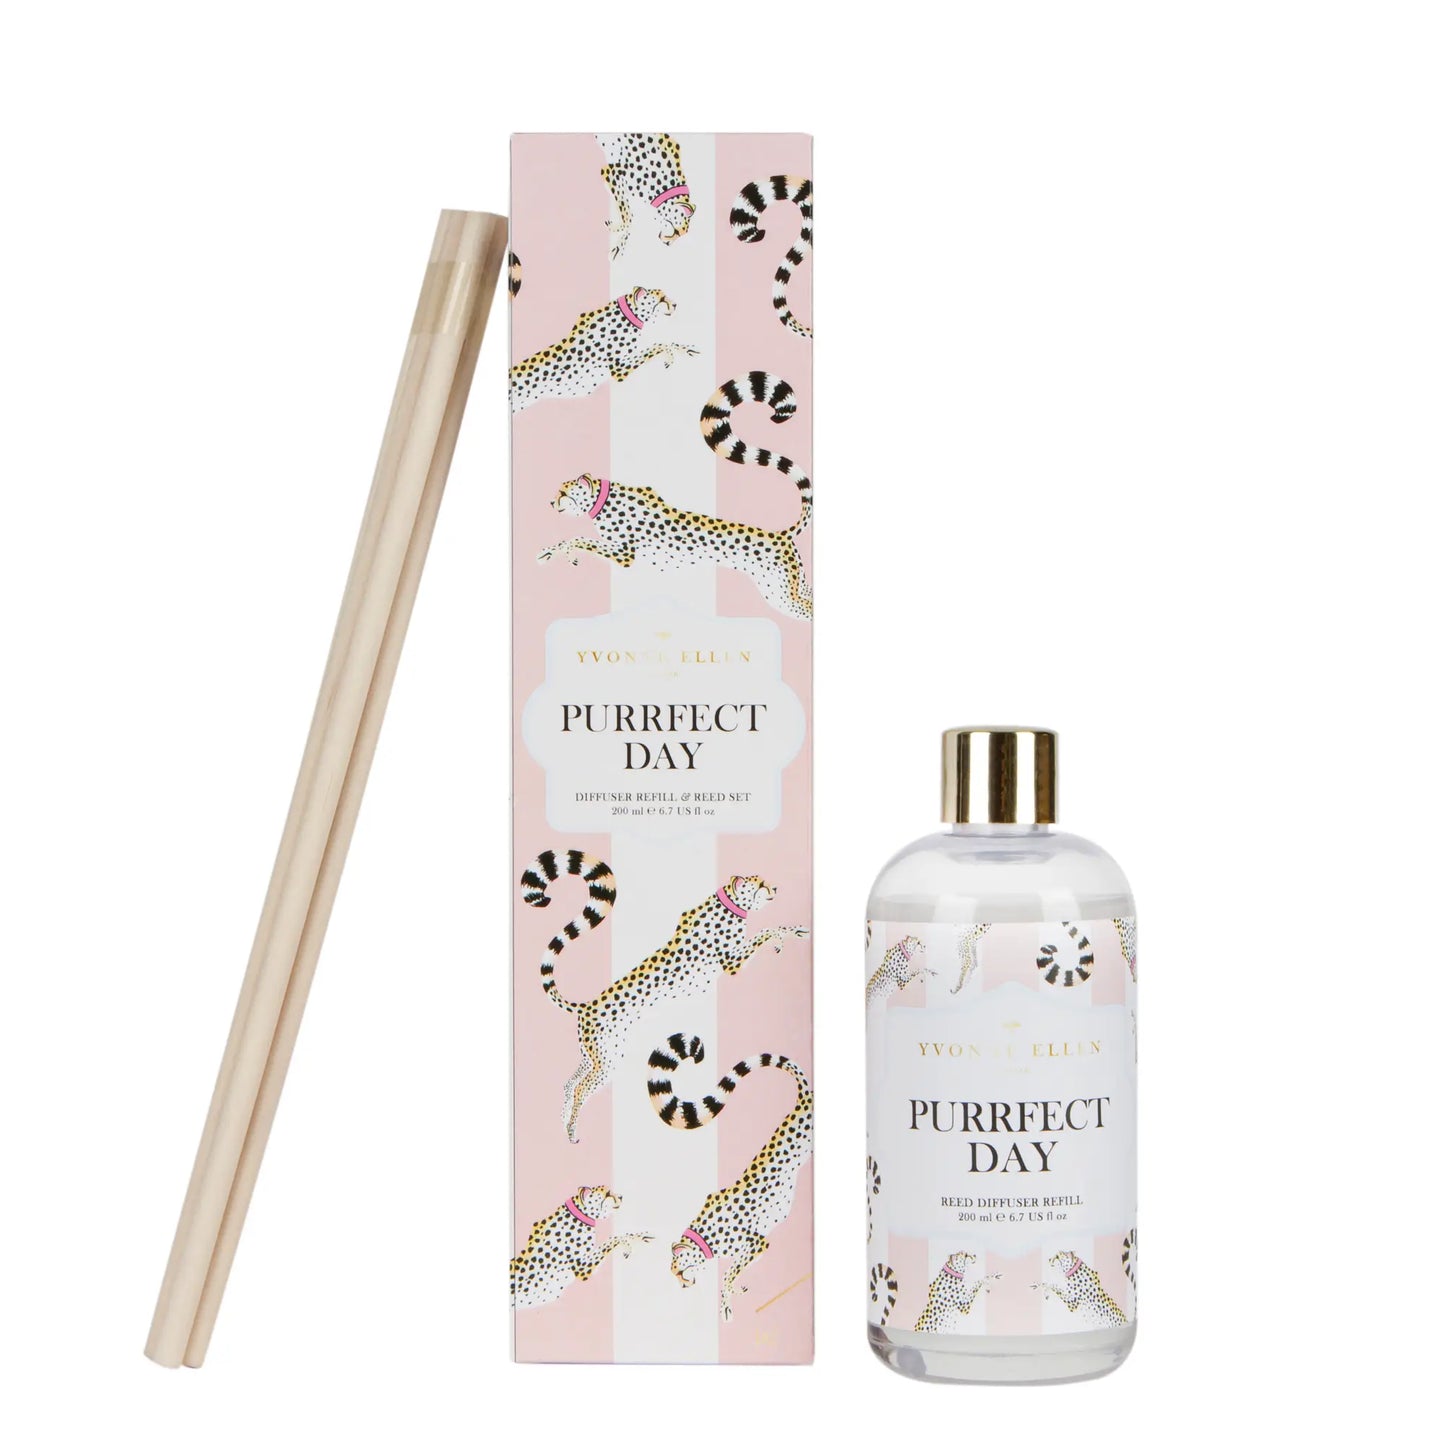 Purrfect Day Reed Diffuser